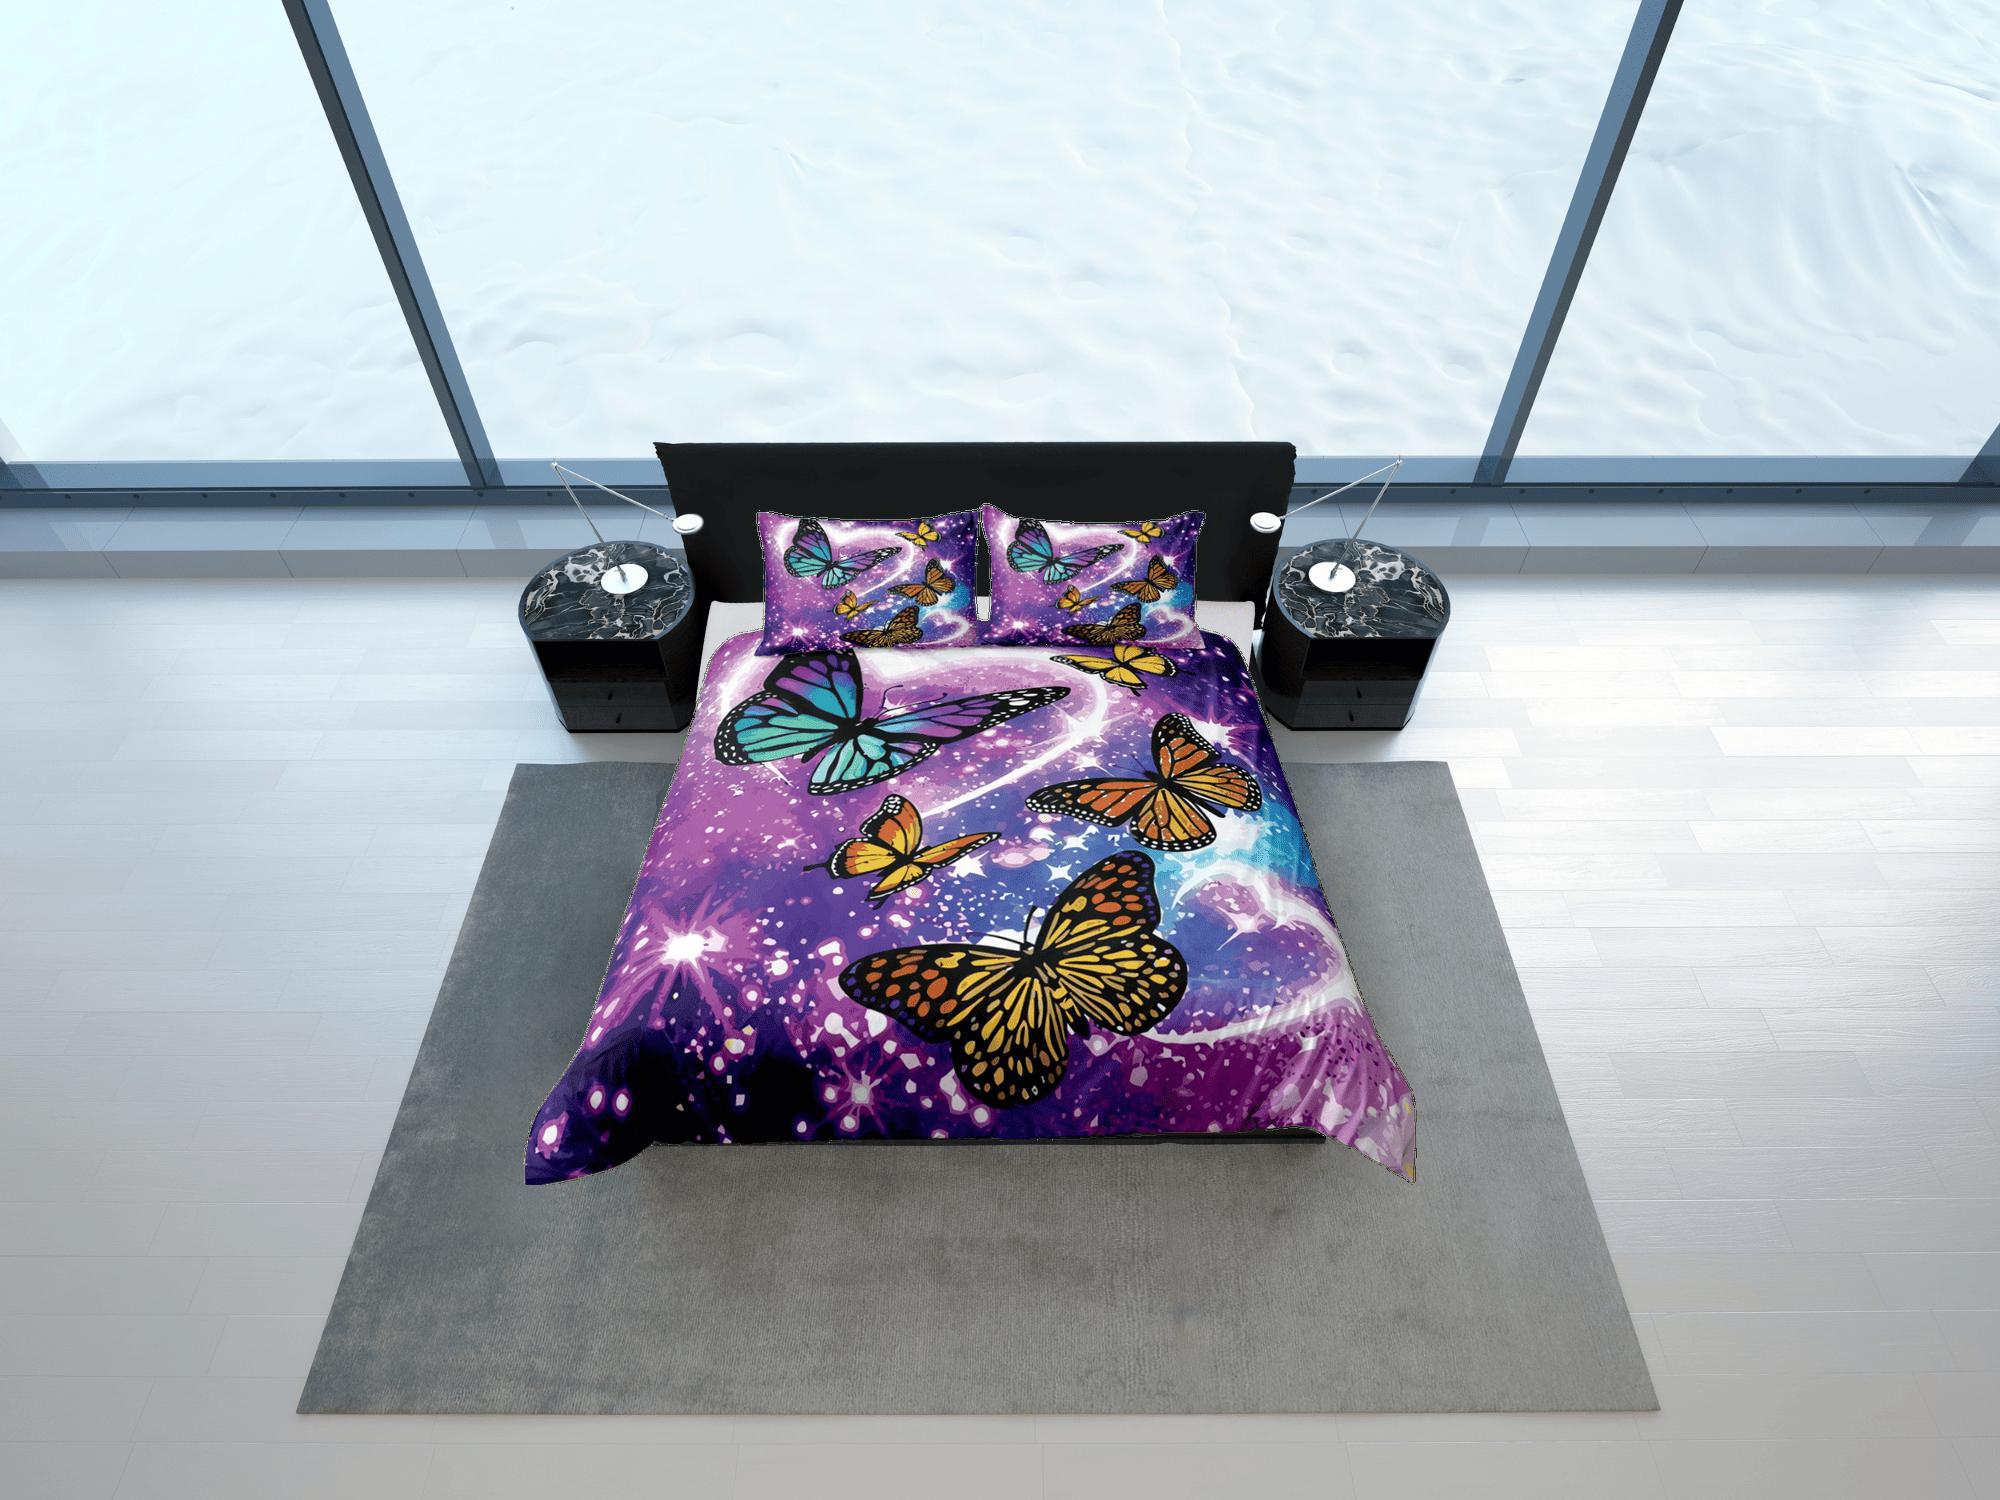 daintyduvet Butterfly Purple Duvet Cover Set Colorful Bedspread, Dorm Bedding with Pillowcase